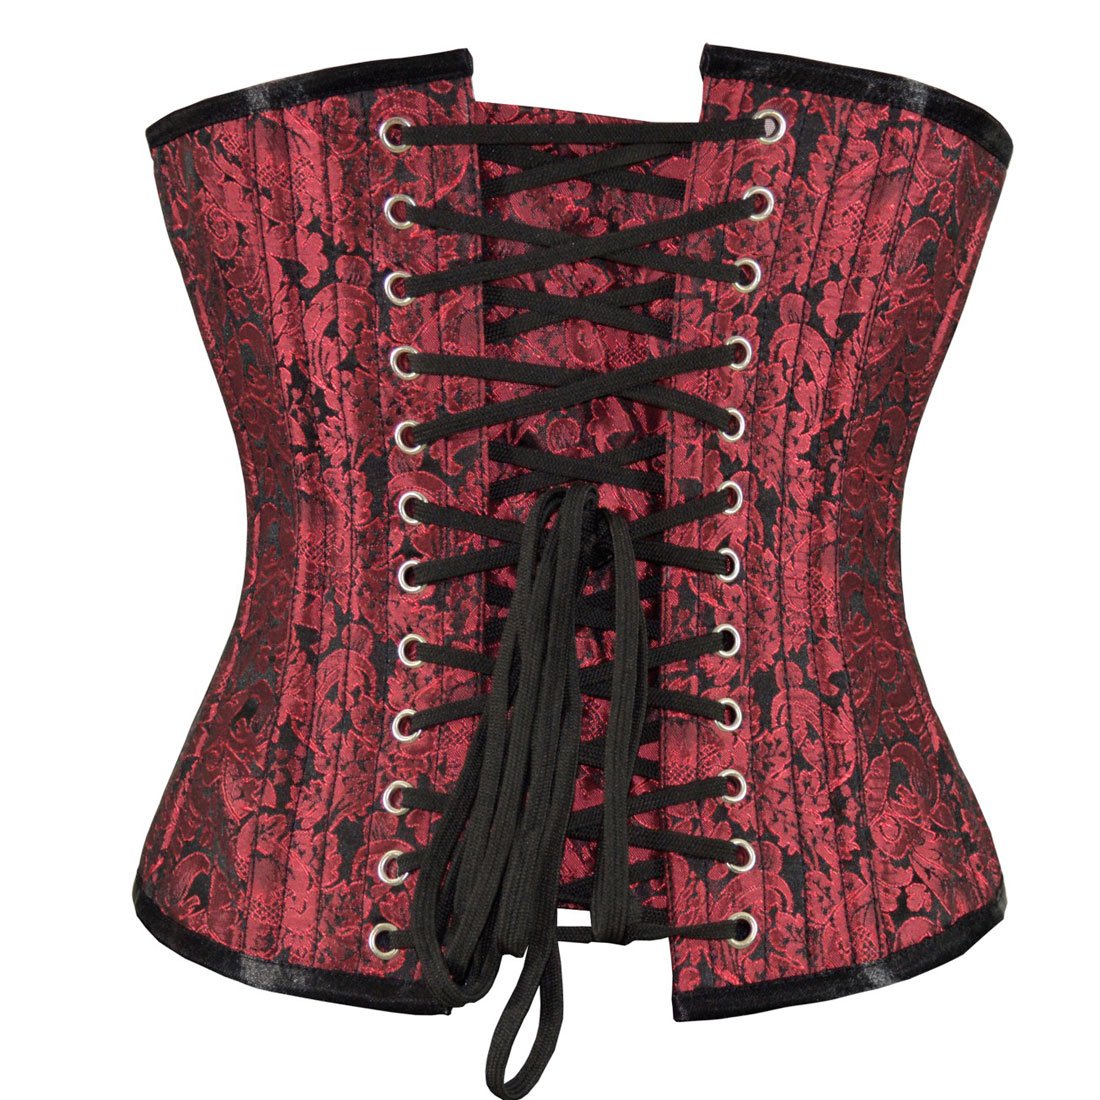 Radella Black Red With Sequined Patch Underbust Corset - Corset Revolution